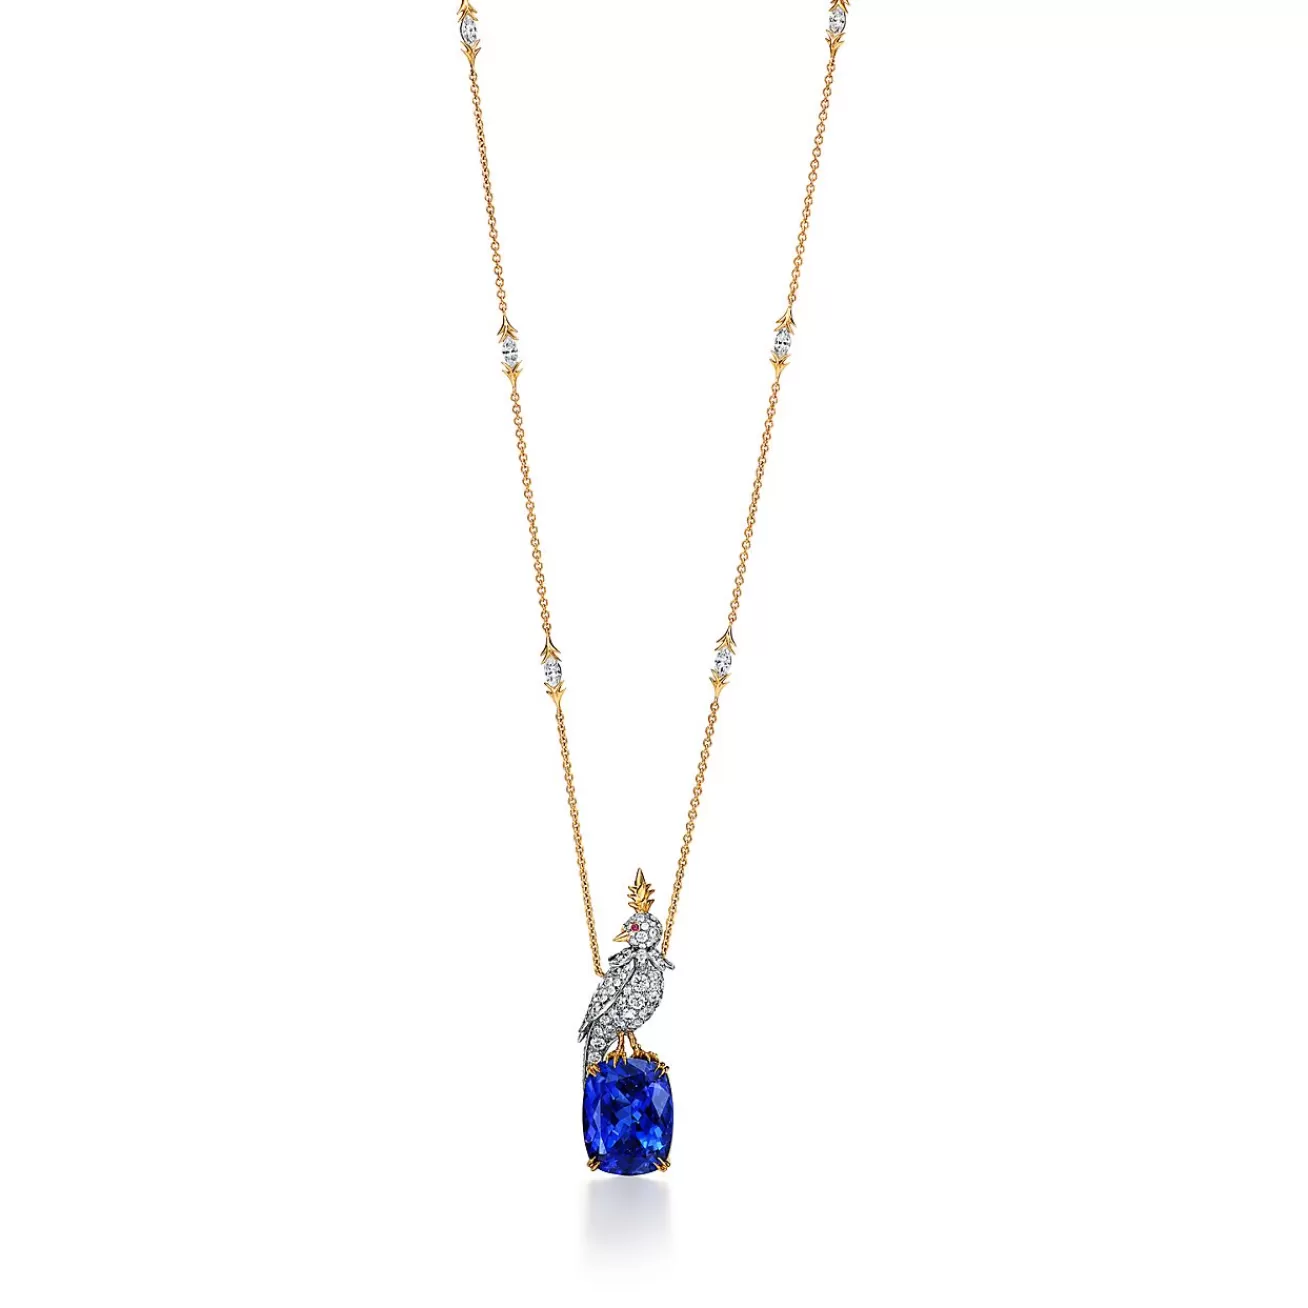 Tiffany & Co. Pendant in Gold and Platinum with a Tanzanite, Diamonds and Pink Sapphires | ^ Necklaces & Pendants | Gold Jewelry